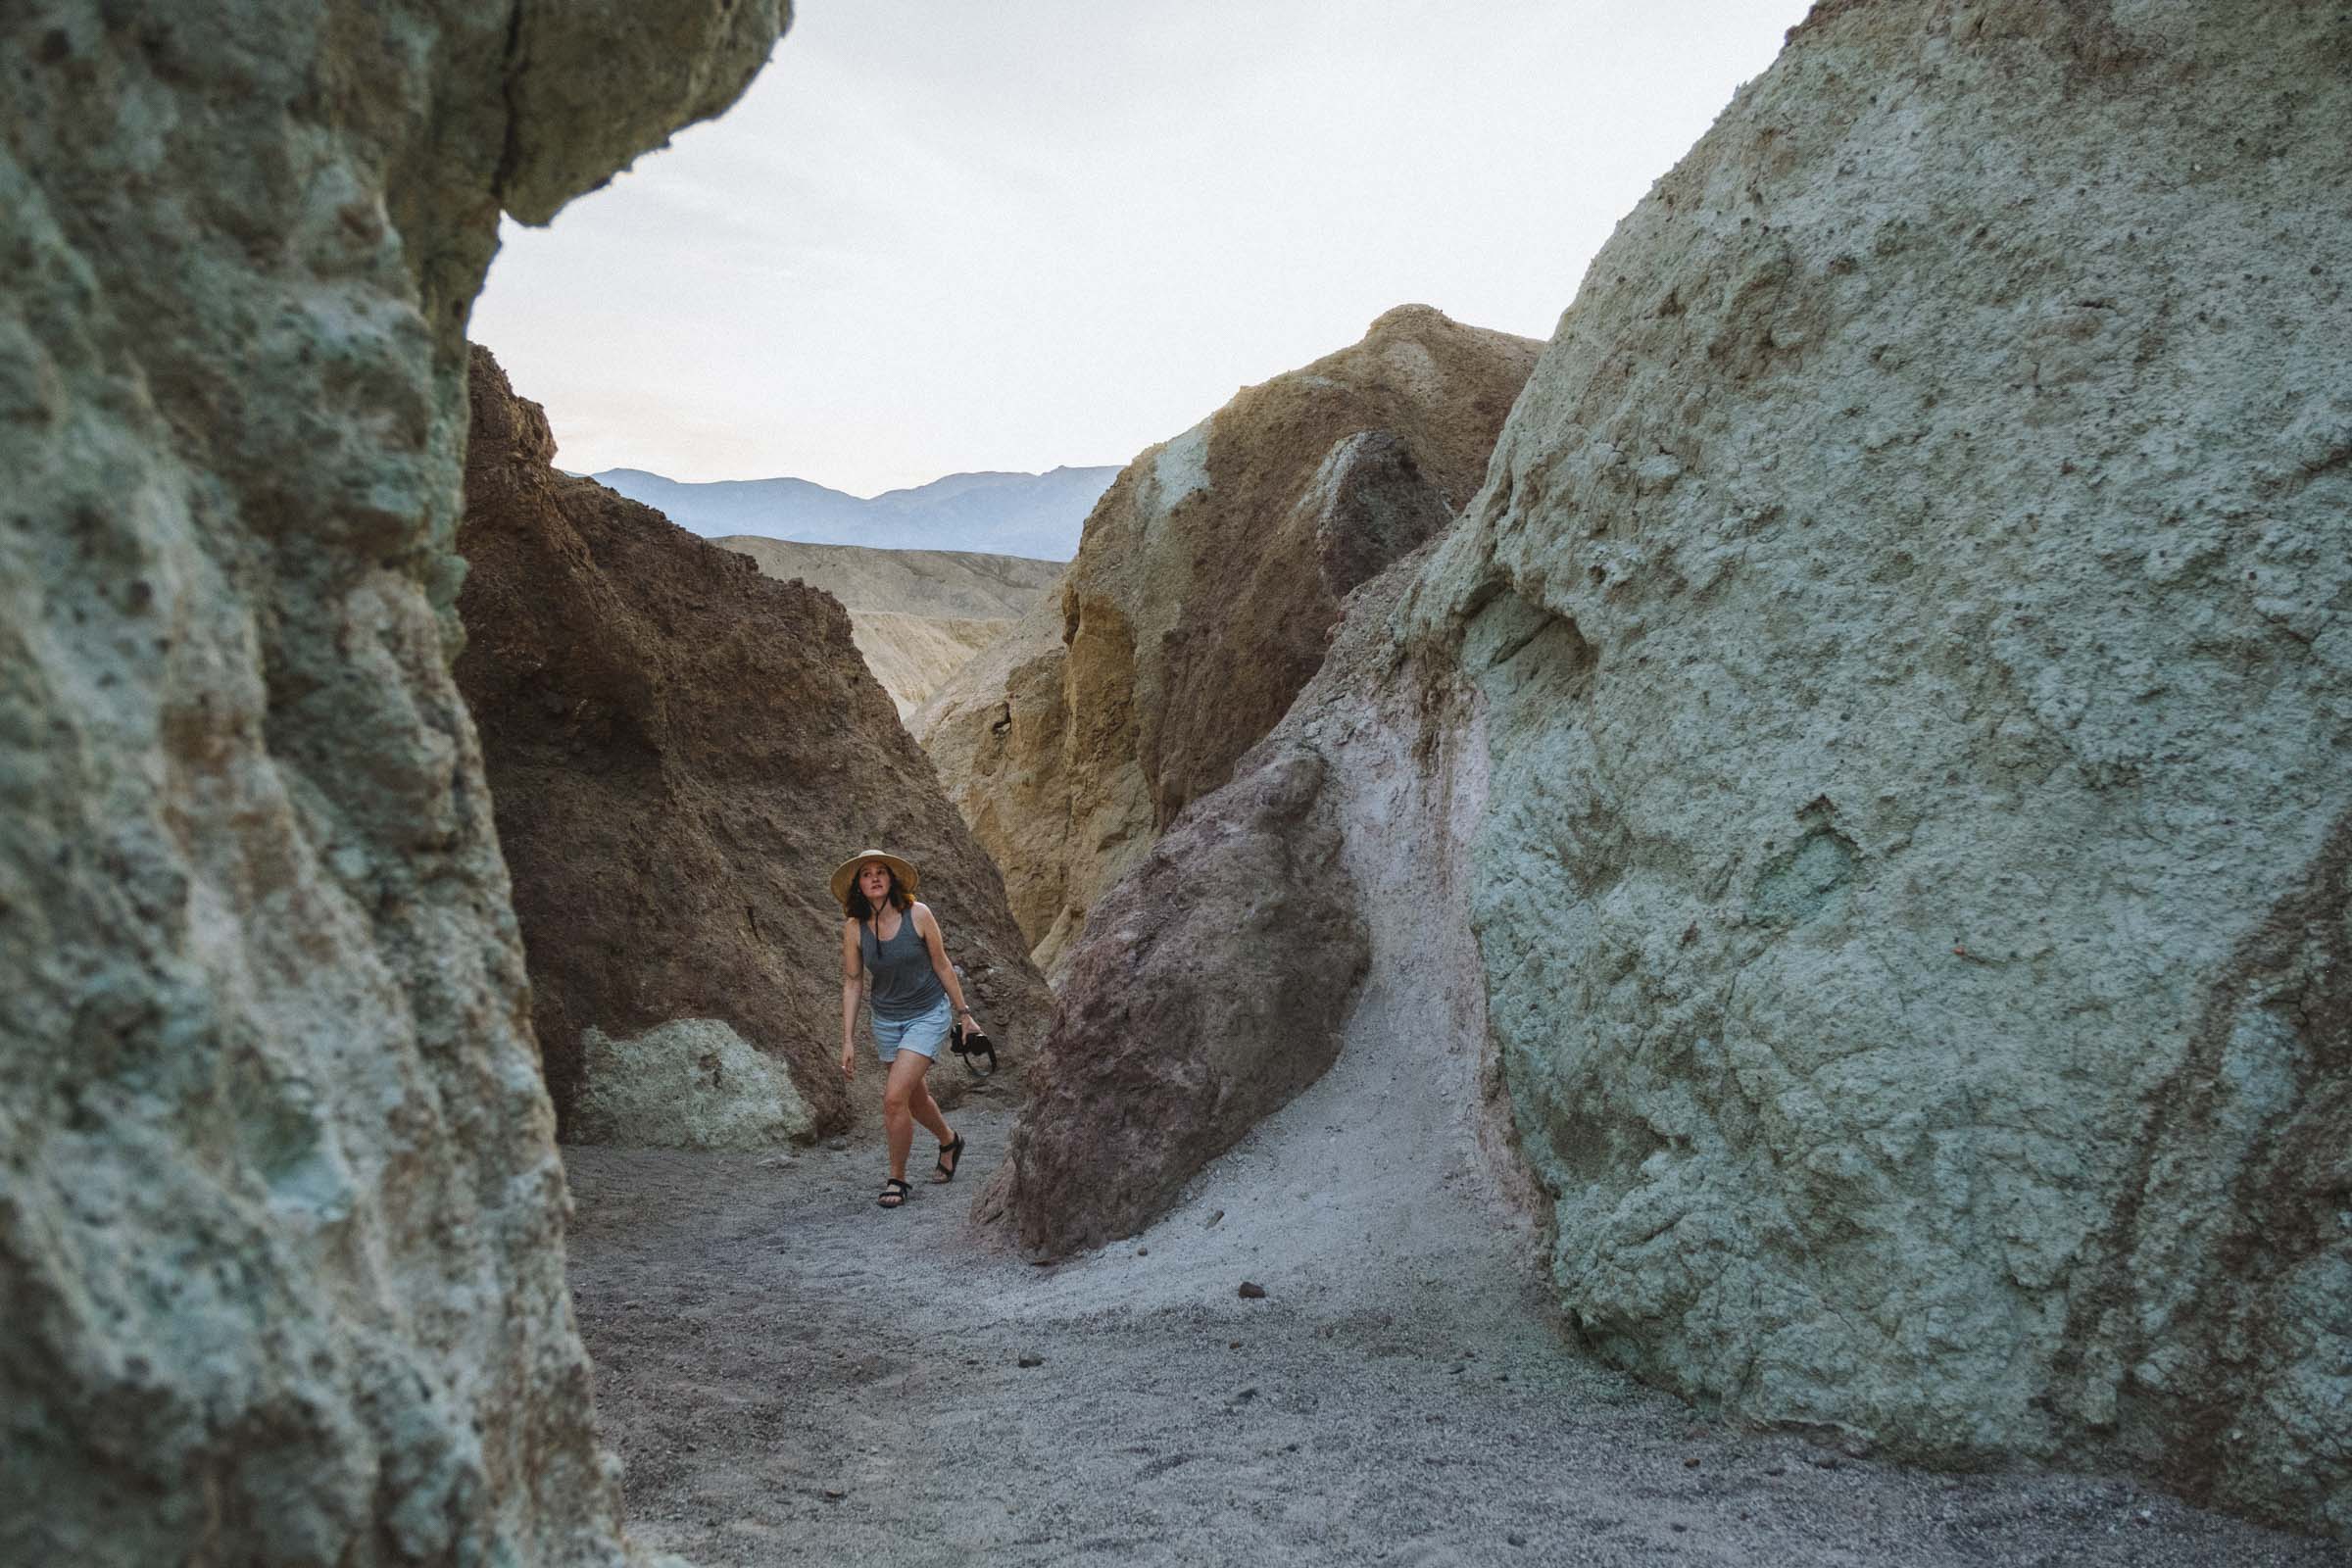 Hiking up the colourful slot canyons of Death Valley